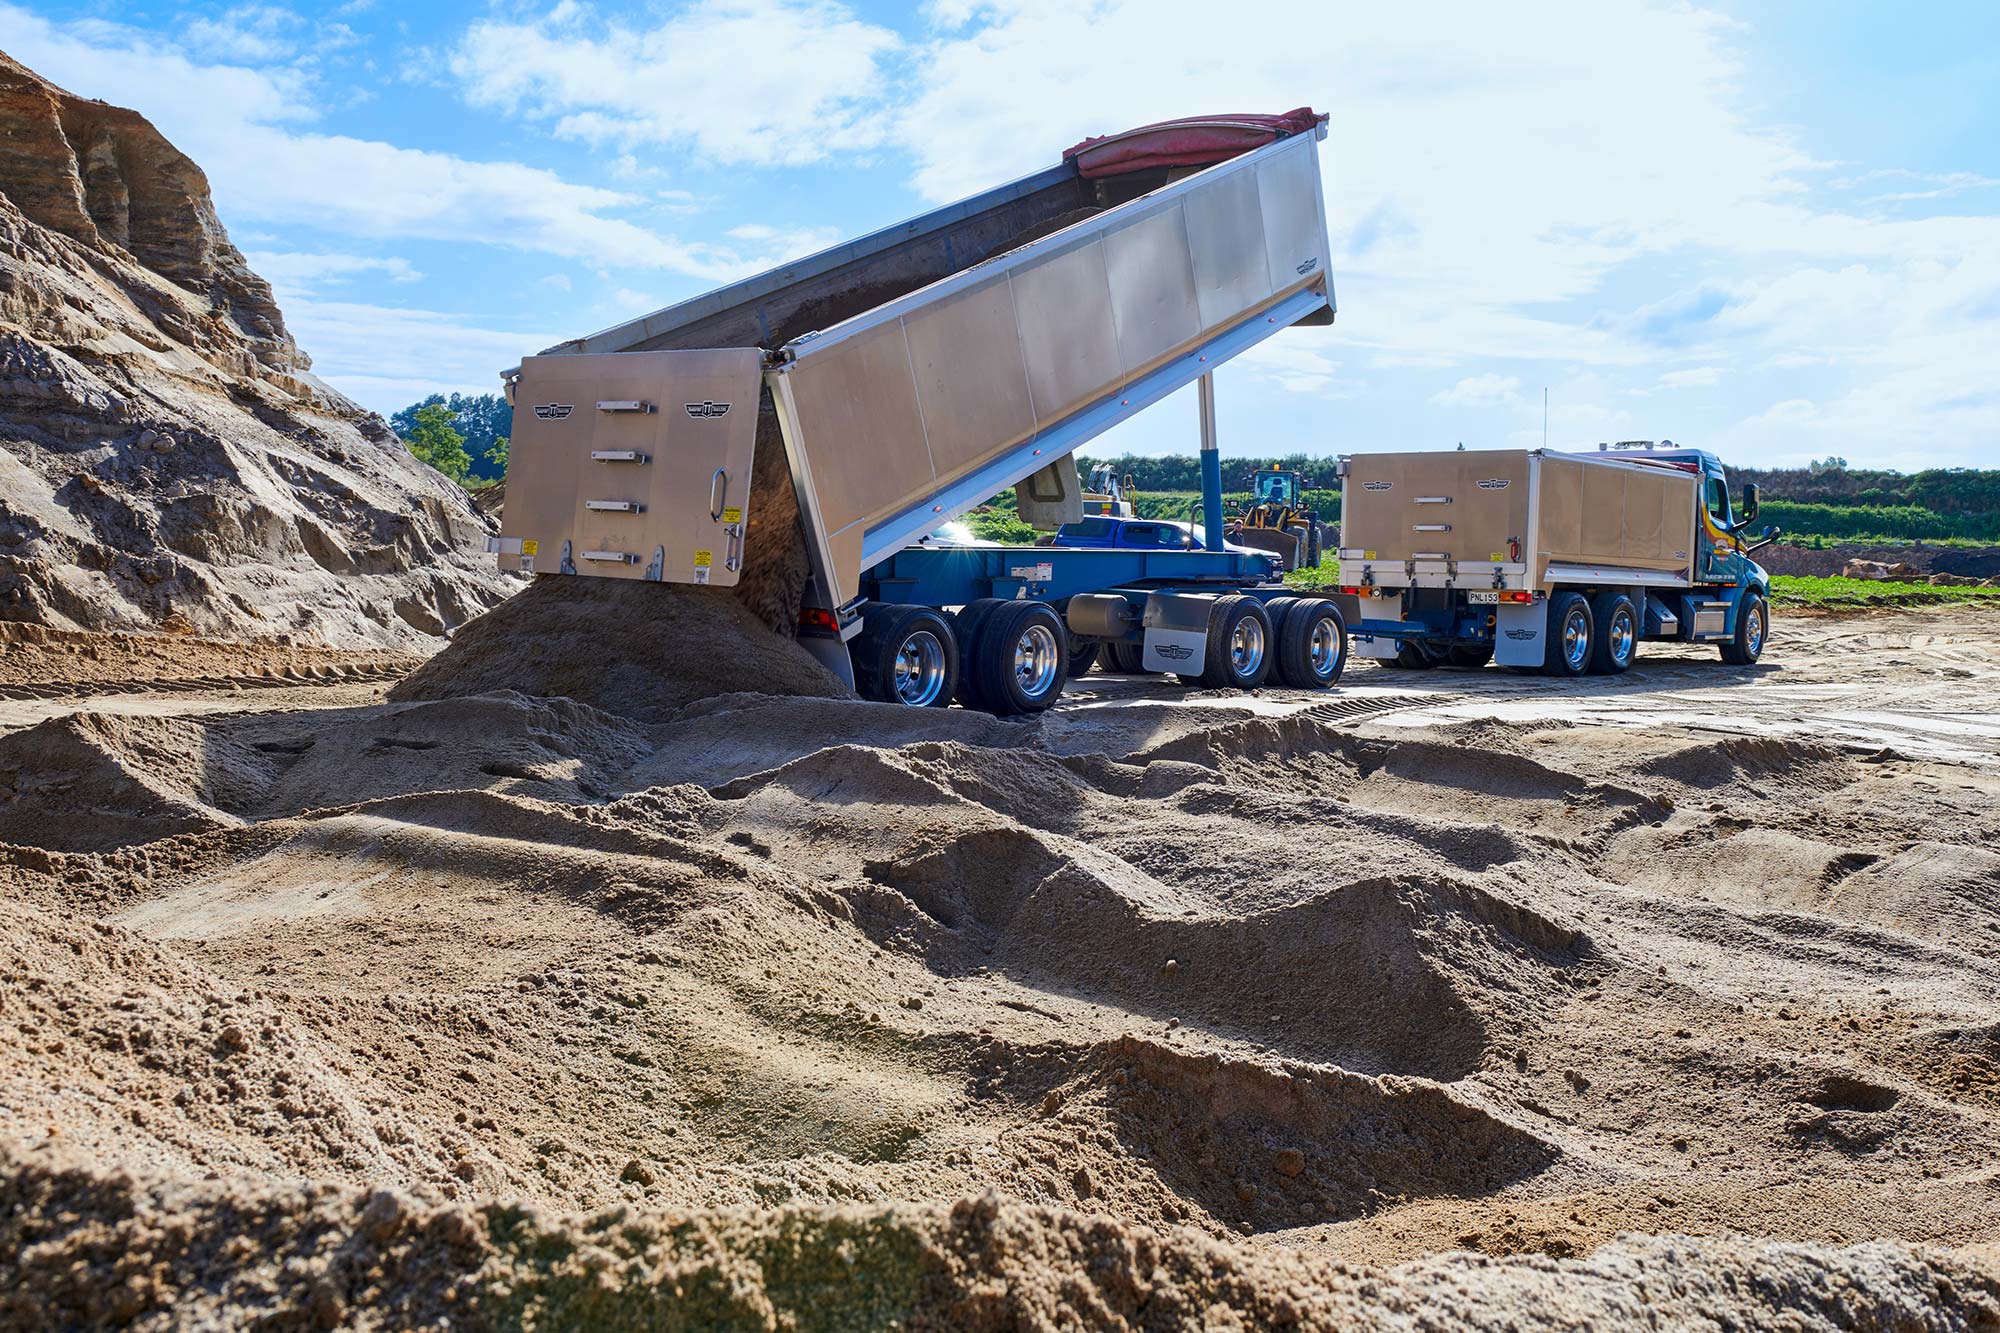 Freightliner Cascadia tipping out a load of sand